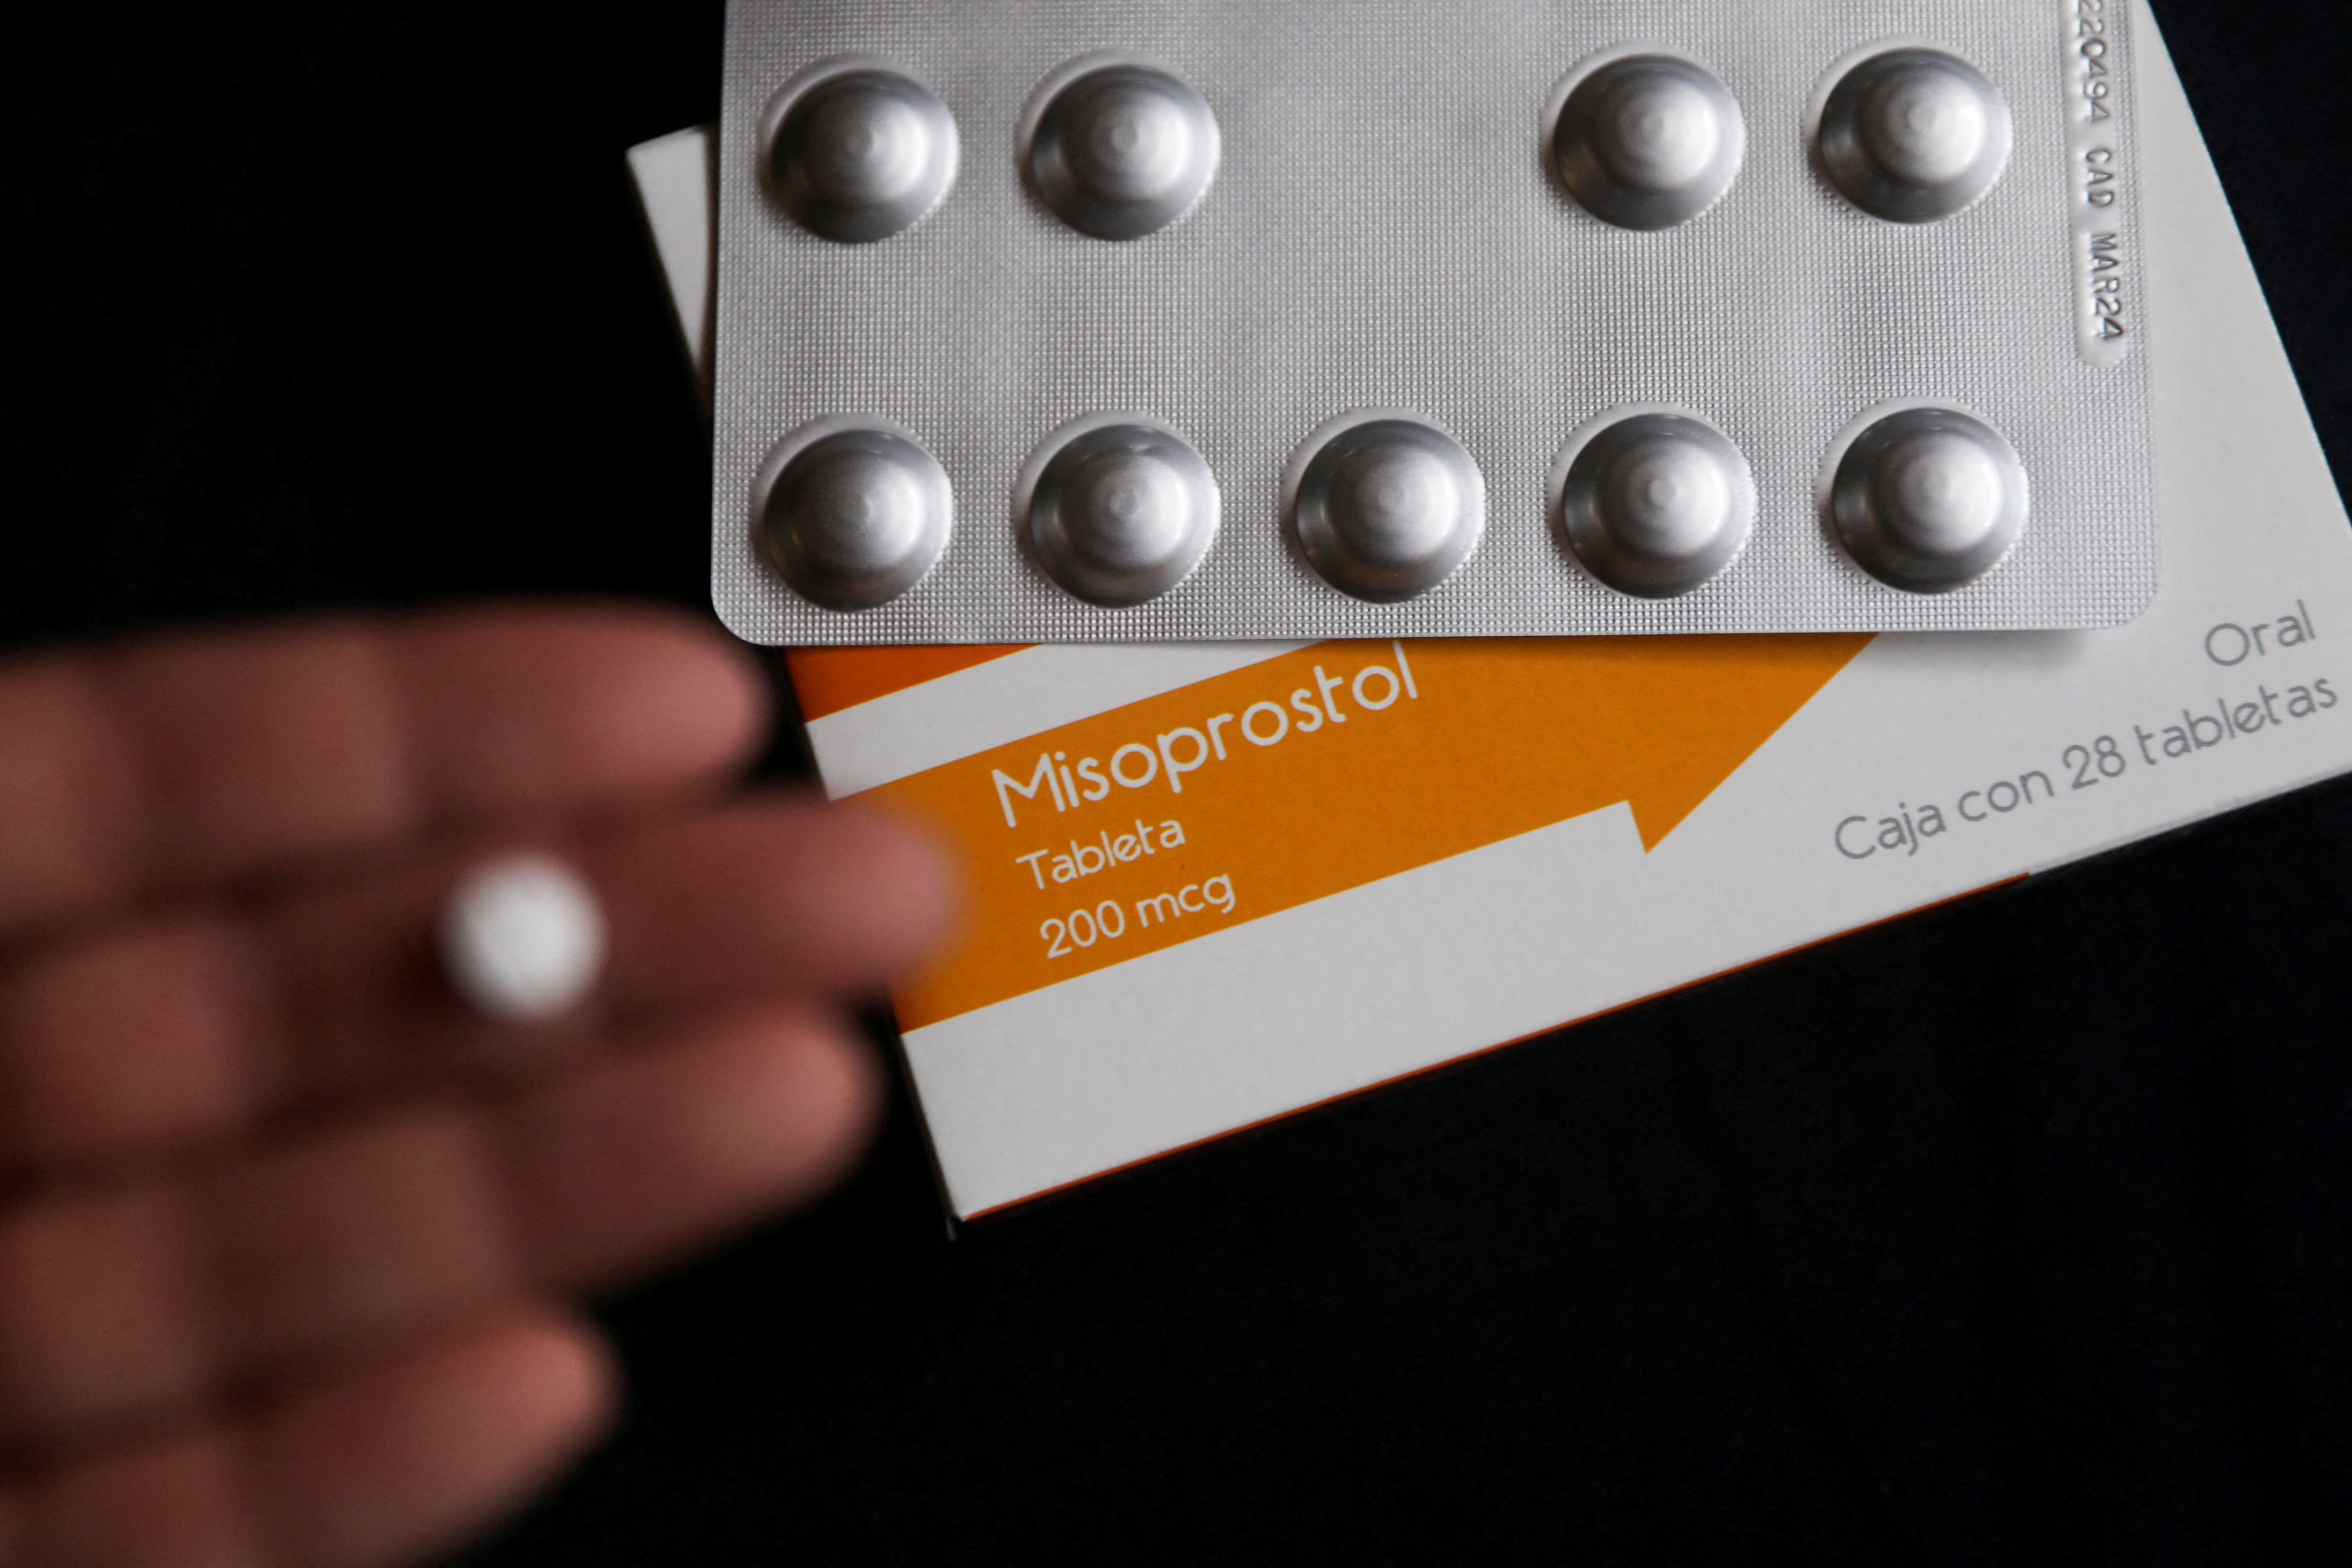 A box of Misoprostol, used to terminate early pregnancies, is pictured in this illustration